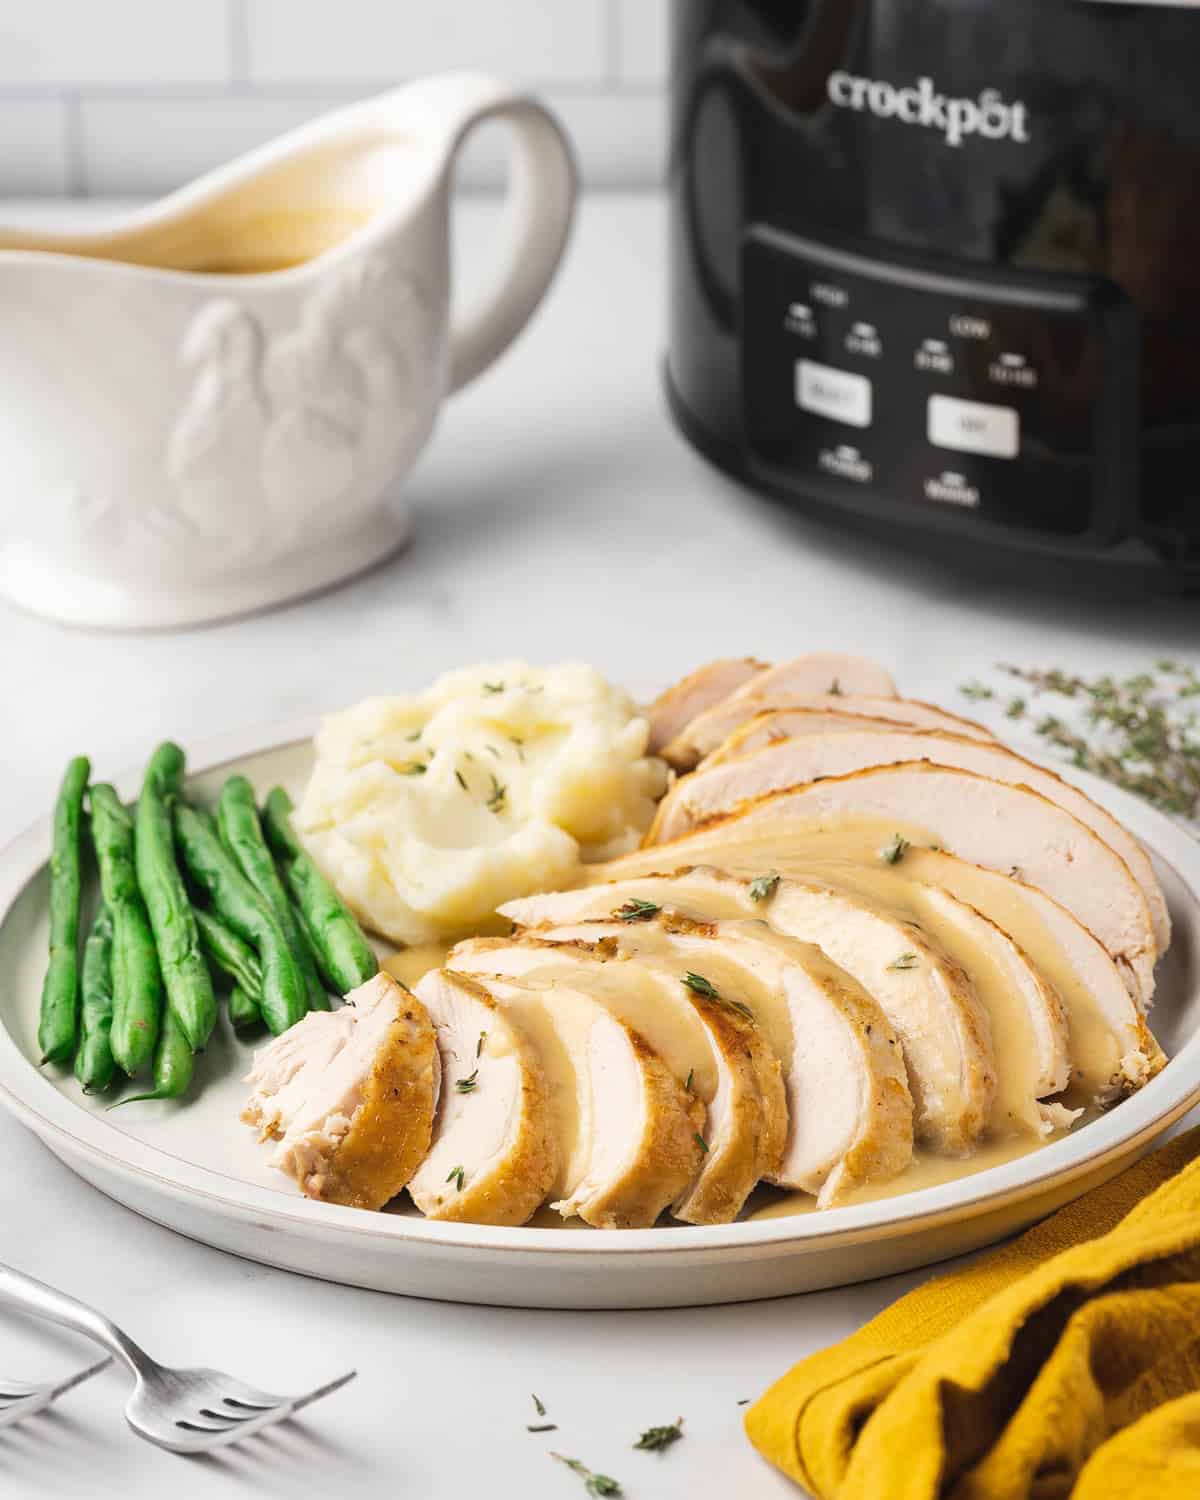 A plate of sliced turkey breast with green beans and mashed potatoes with a slow cooker in the background.